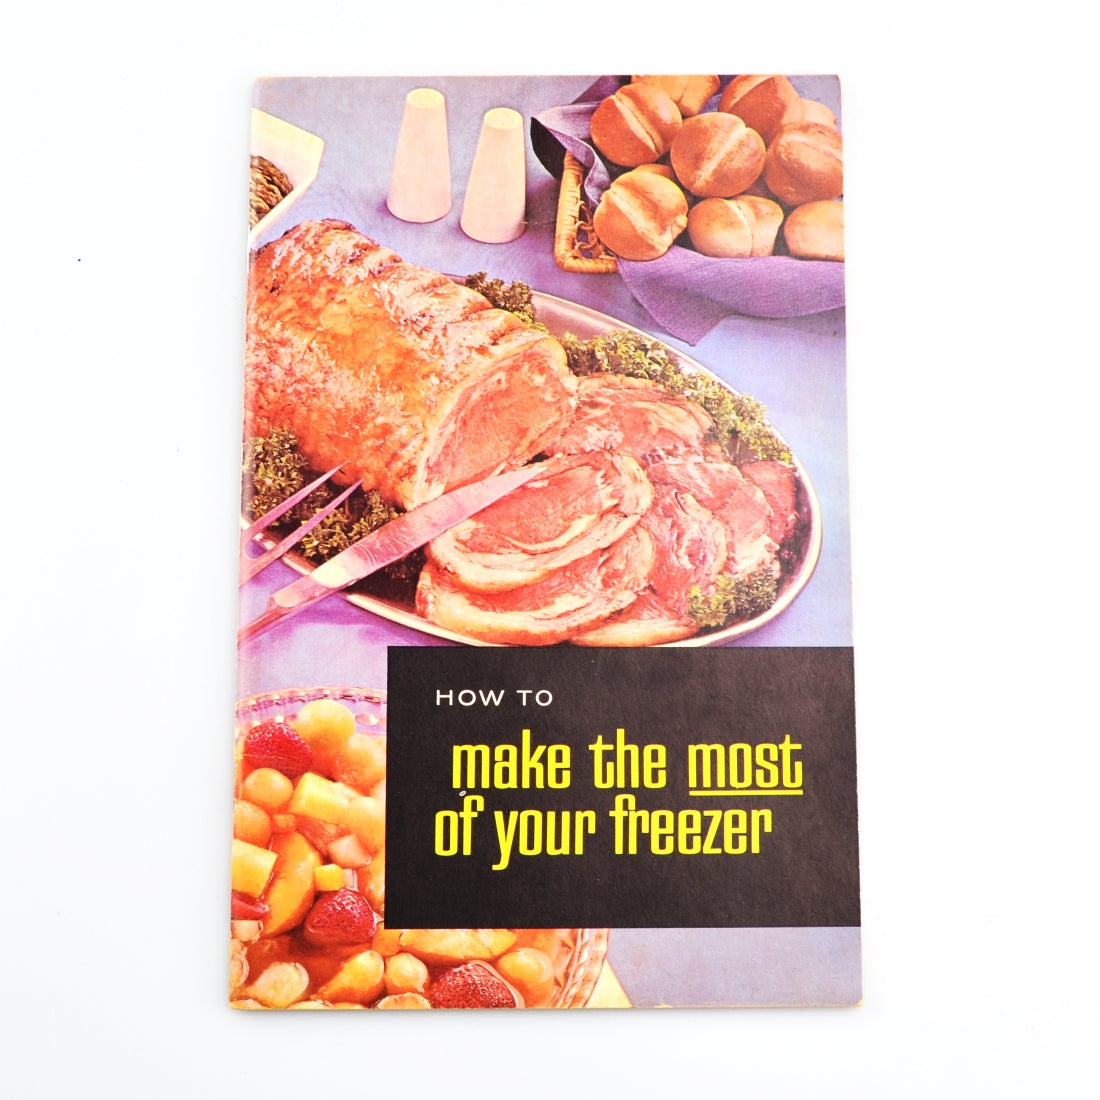 Vintage Freezer Cookbook - How To Make The Most Of Your Freezer by James Winter